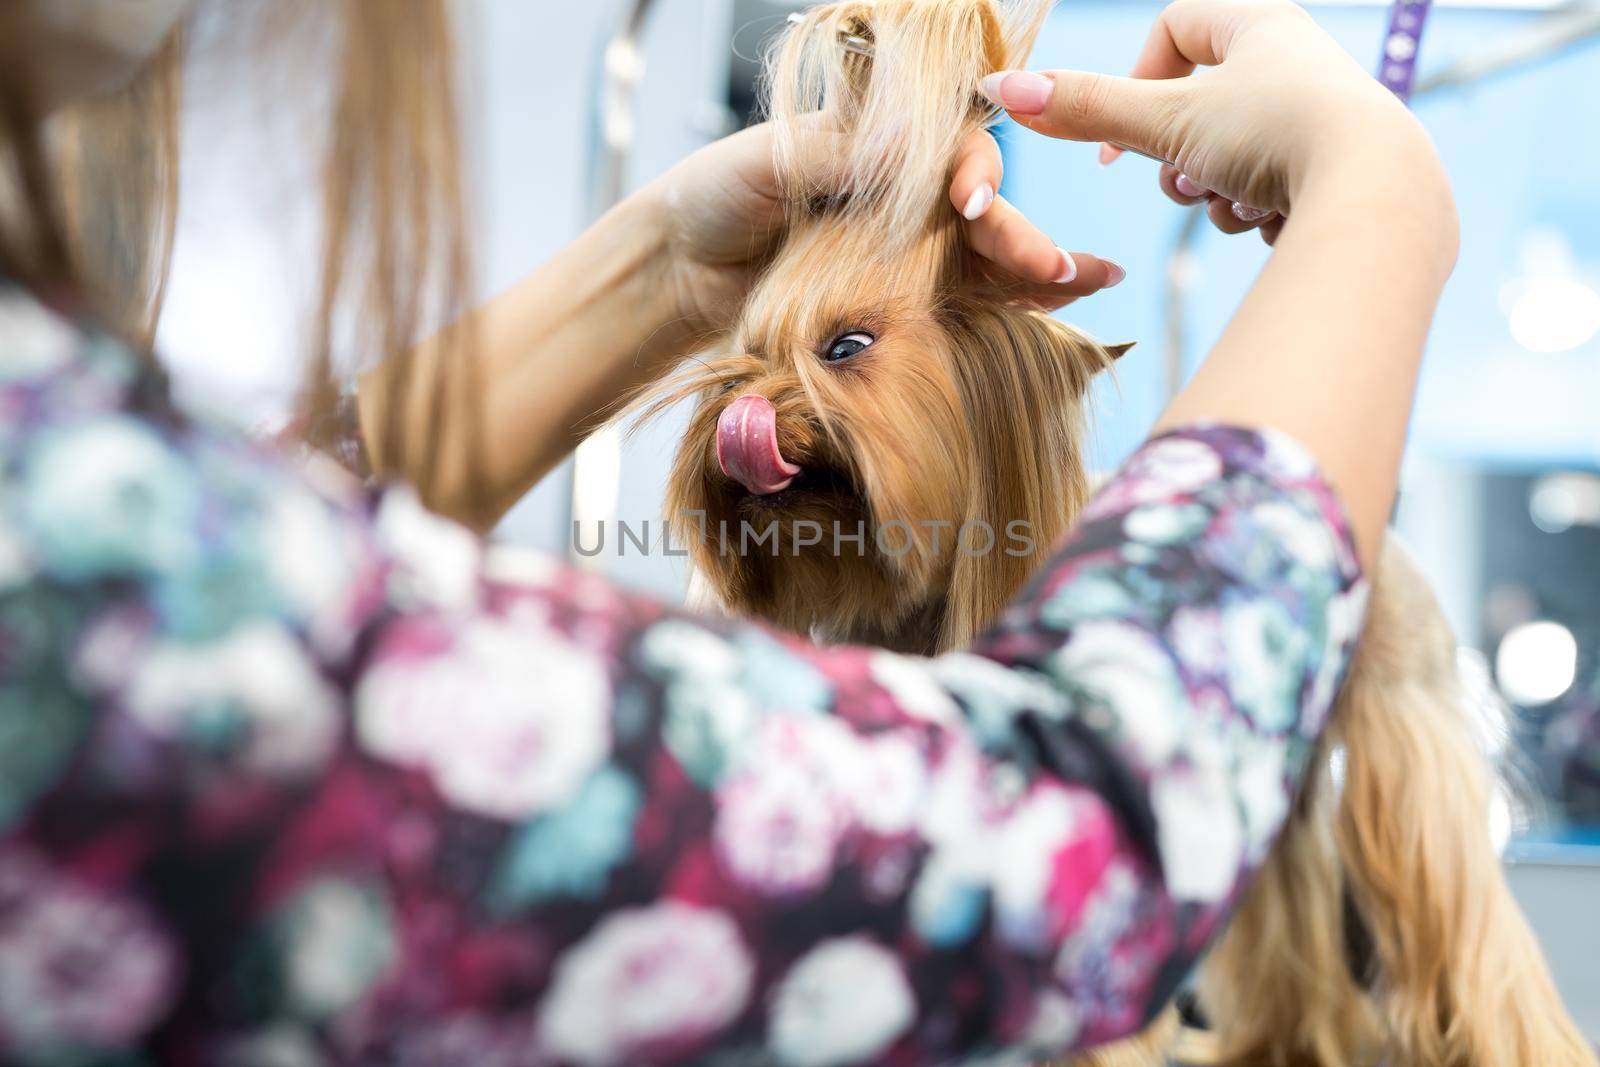 groomer puts a bow on the dog's head